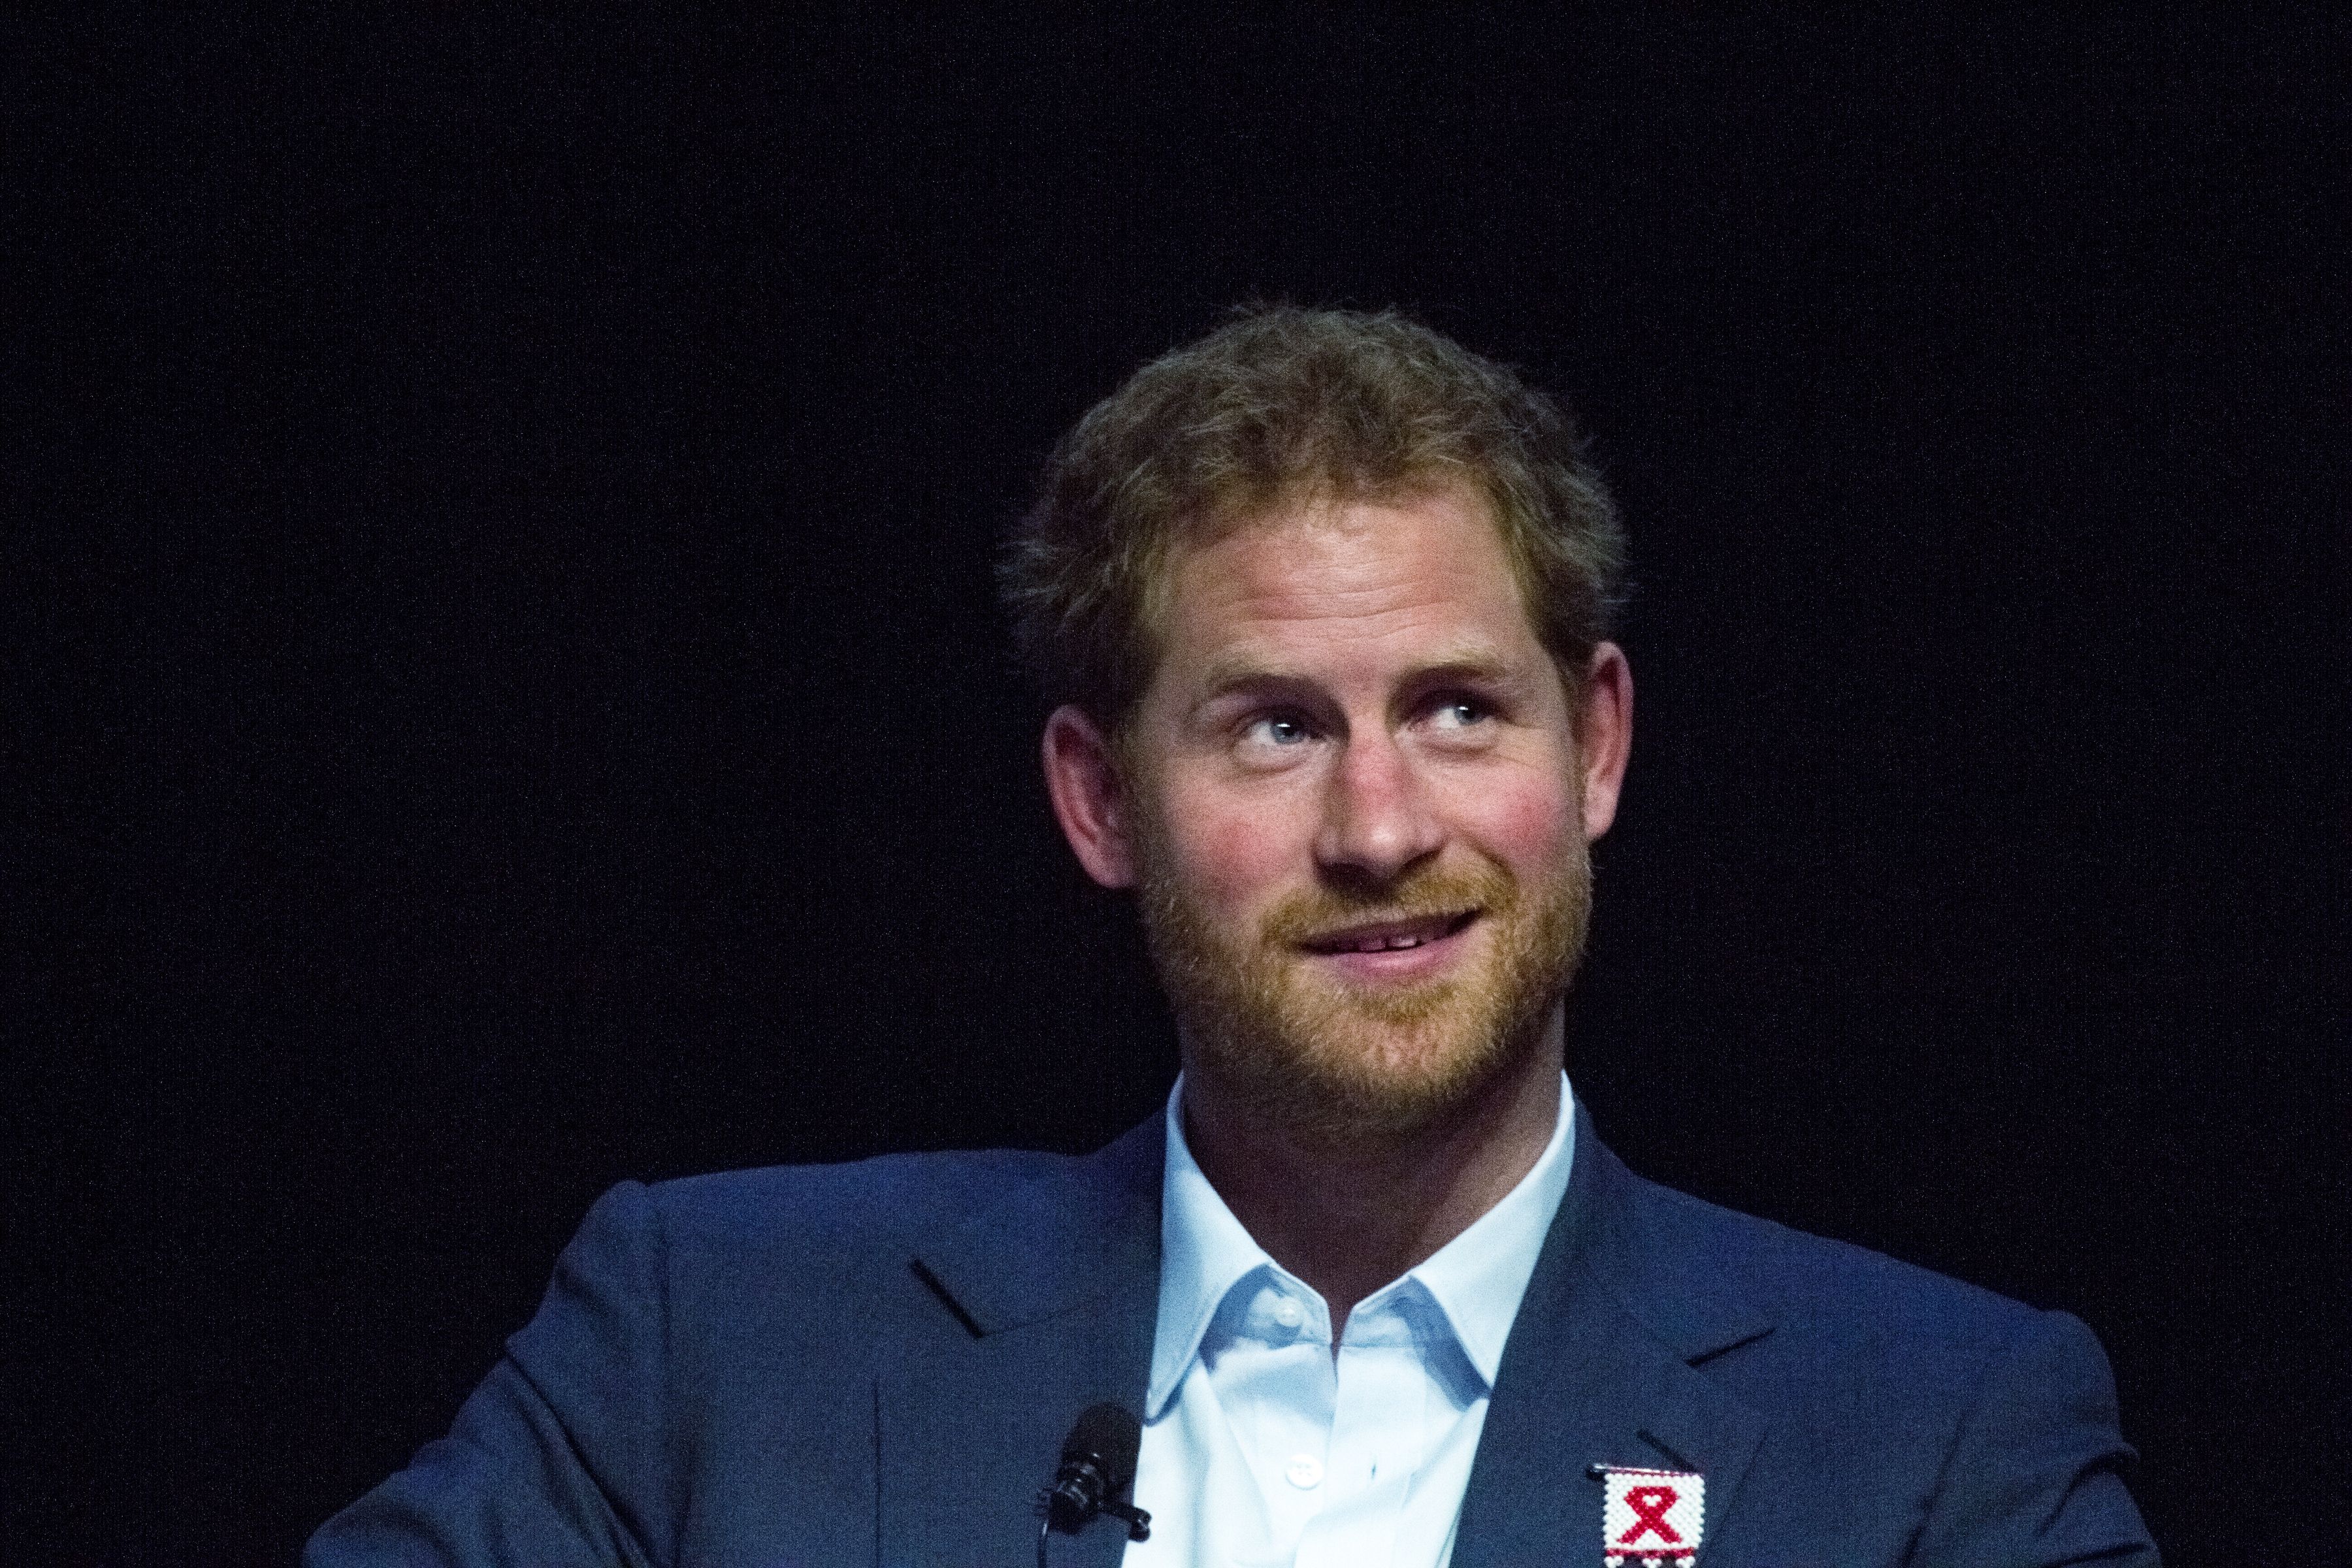 Prince Harry attends the International Aids Confer